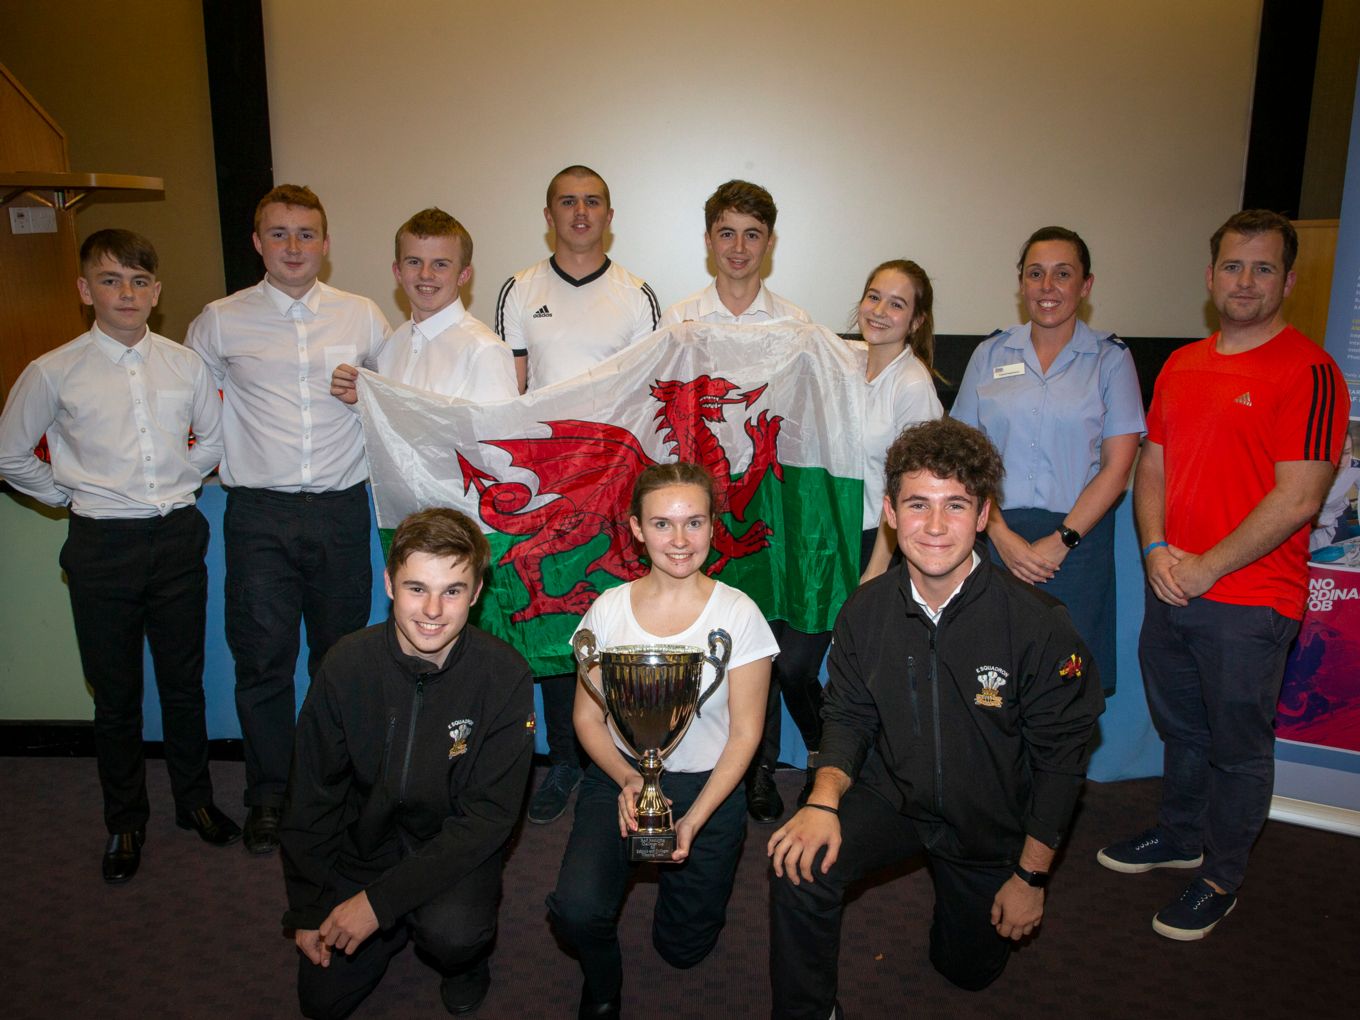 The winning team from Coleg Sir Gâr (Glyn Price stands far right)